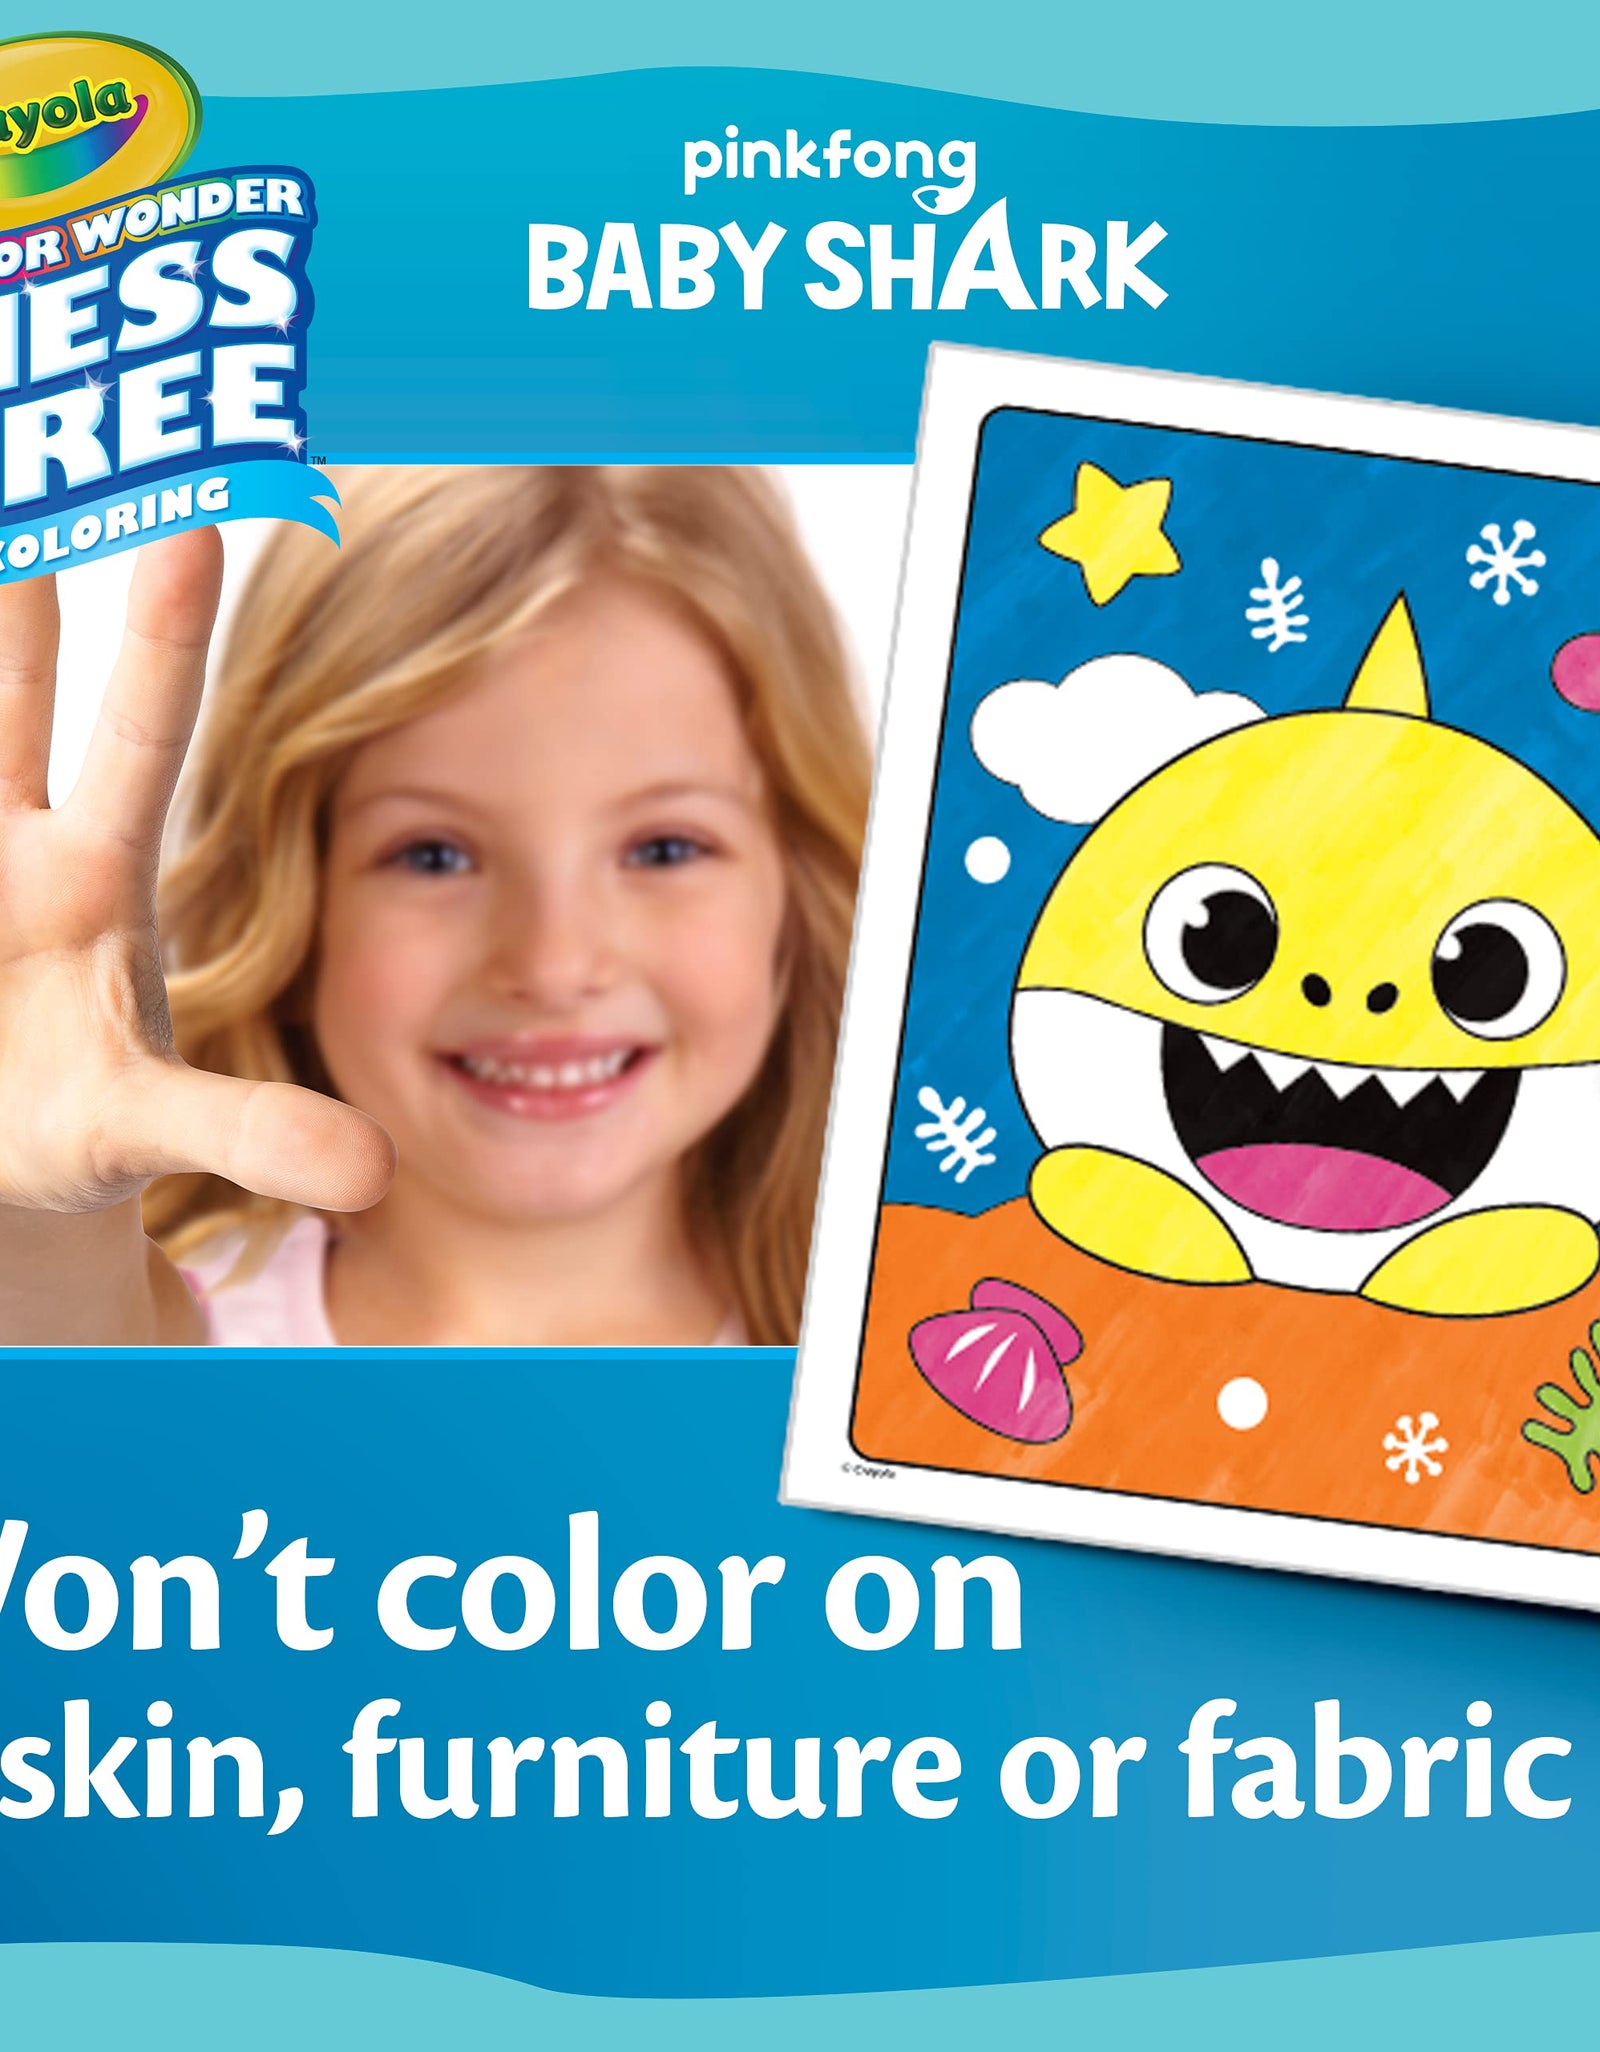 Crayola Baby Shark Wonder Pages, Mess Free Coloring, Gift for Kids, 1 Count (Pack of 1)